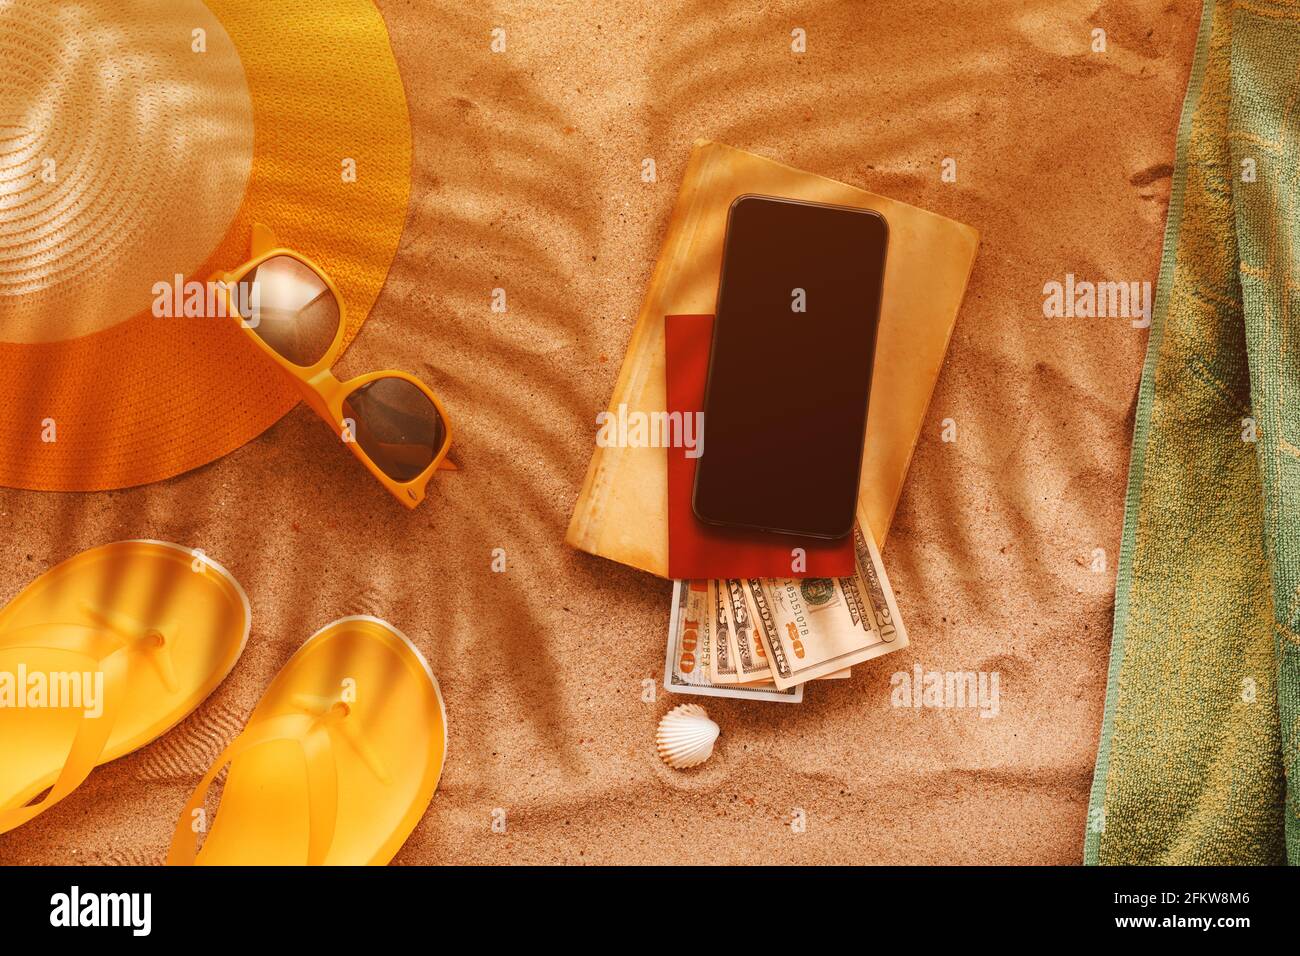 Summer holiday at sandy beach, flat lay top view with personal accessories at seaside and palm leaf shadows Stock Photo